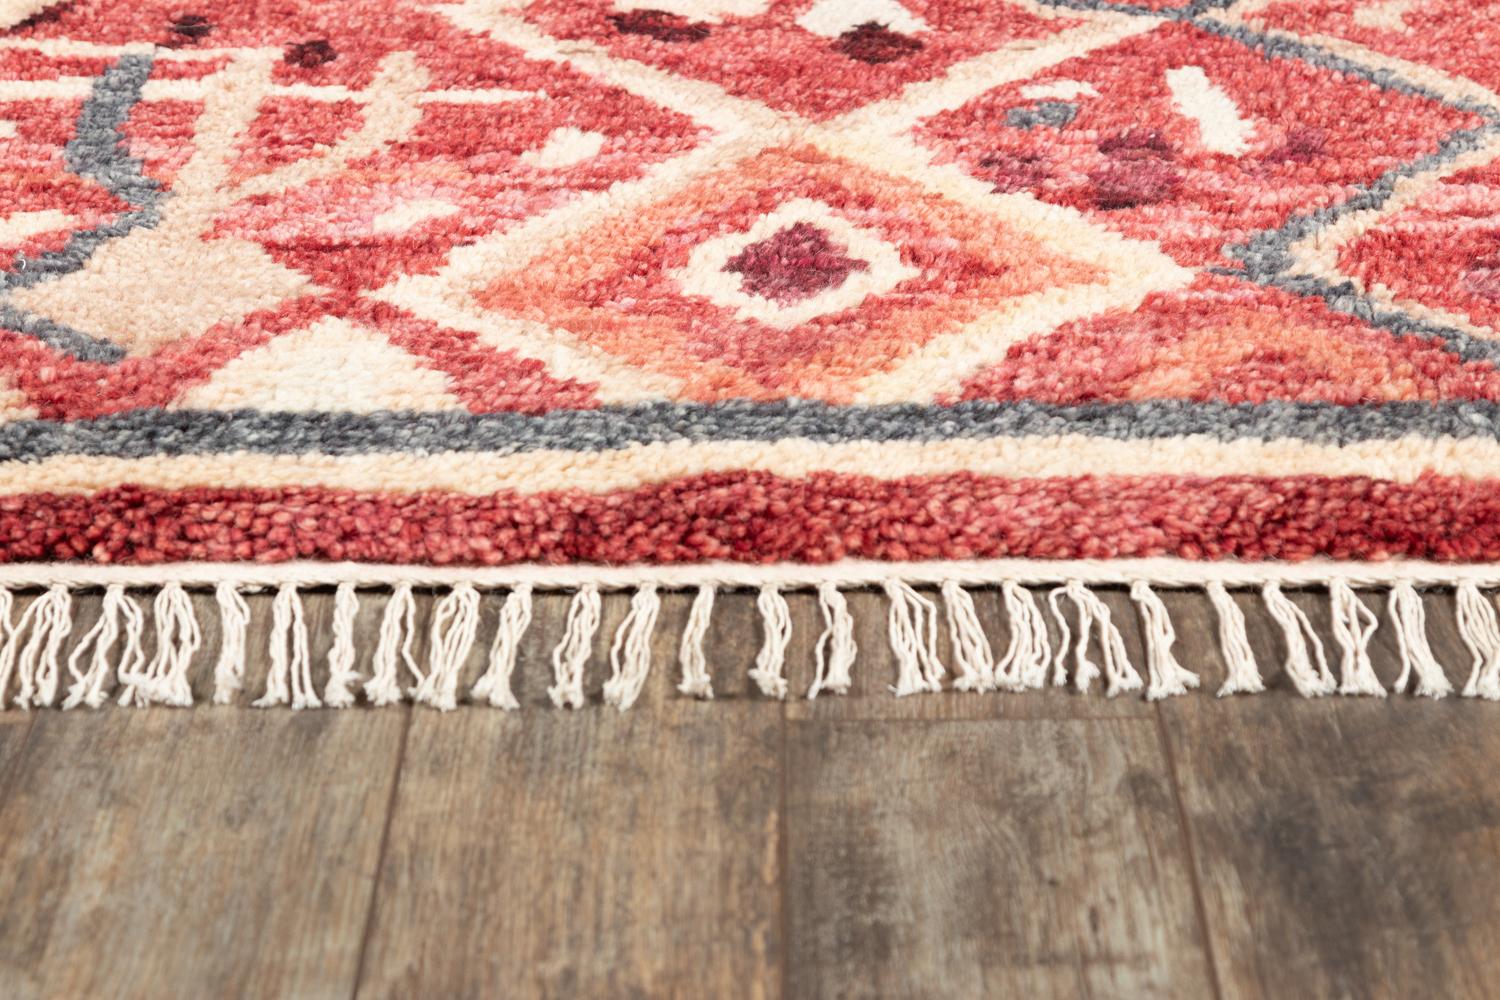 Hand-Woven “Doukkala Gnibi” Moroccan-Inspired Rug by Christiane Lemieux For Sale